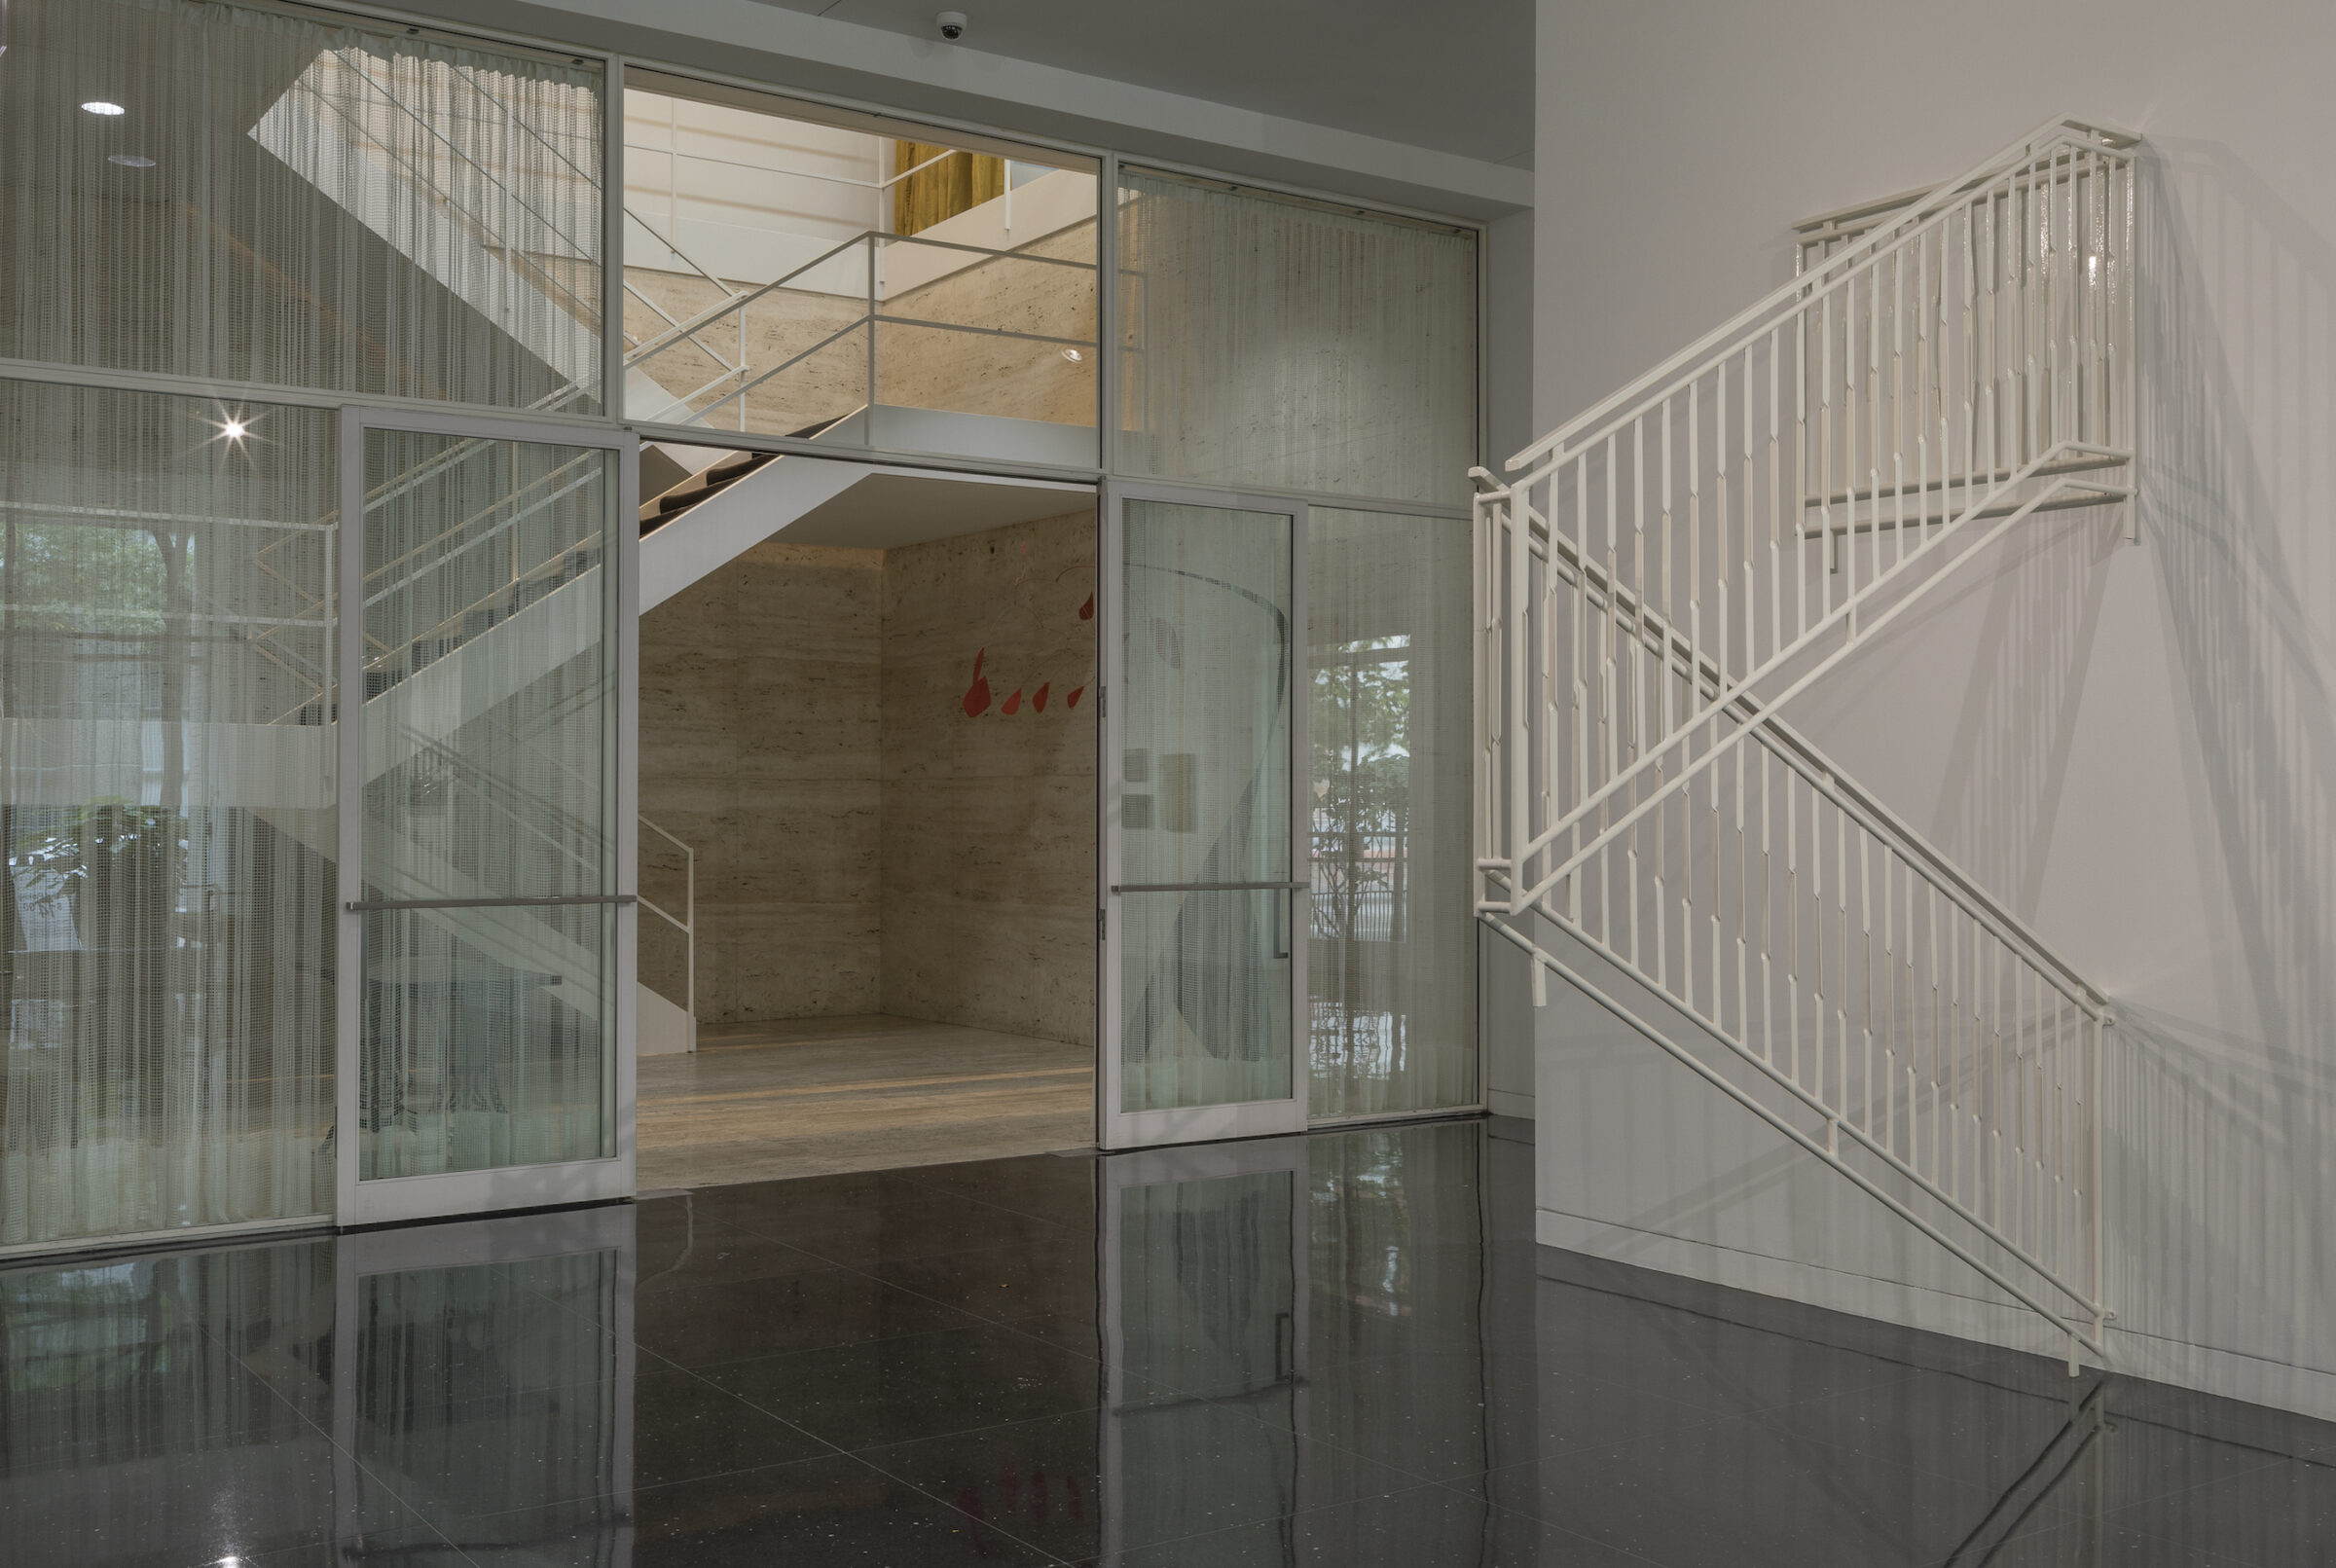 Installation view of a full white staircase railing installed on a white gallery wall and hanging in front of the white Mies van der Rohe stairwell.